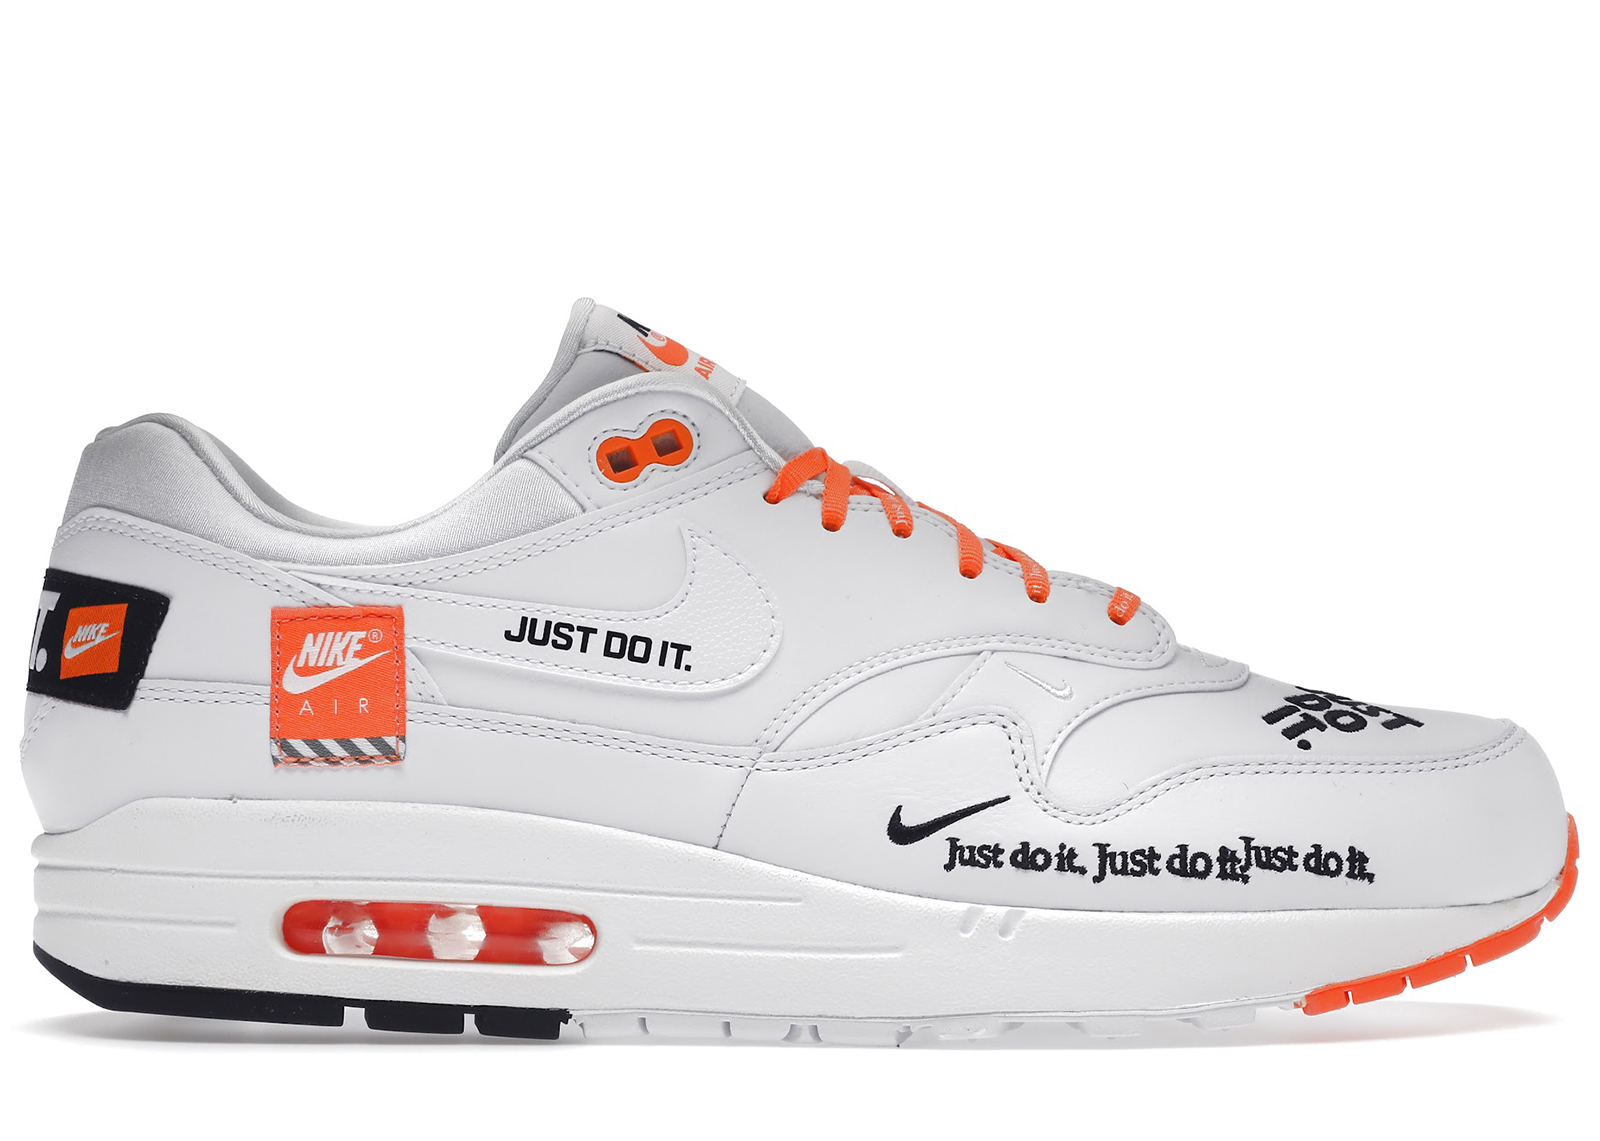 Nike Air Max 1 Just Do It Pack White メンズ - AO1021-100 - JP